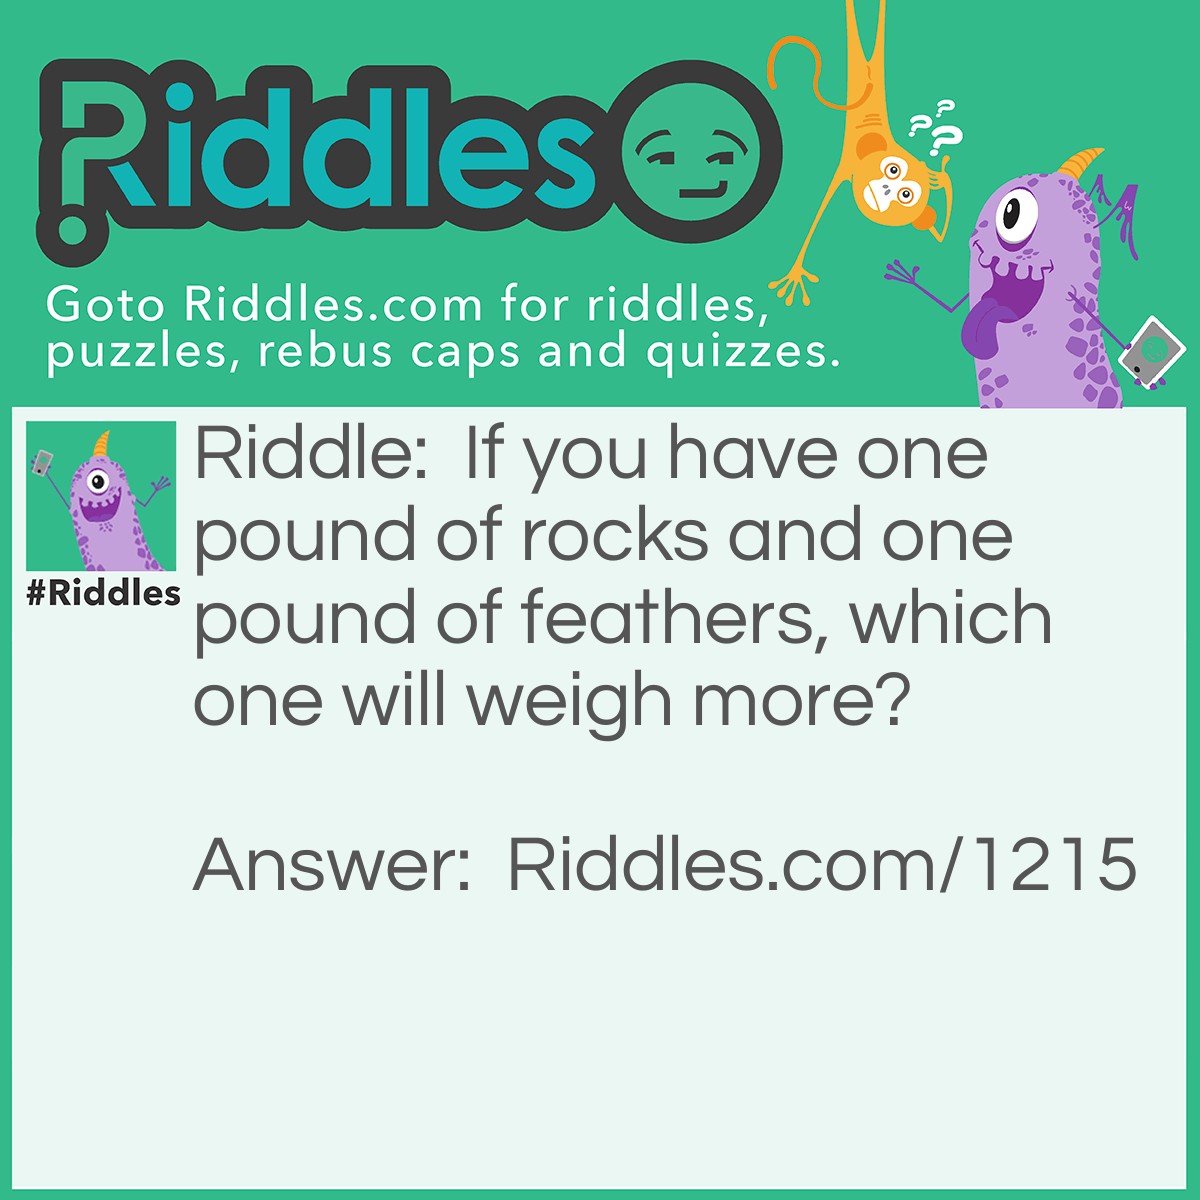 Riddle: If you have one pound of rocks and one pound of feathers, which one will weigh more? Answer: They both weigh a pound.